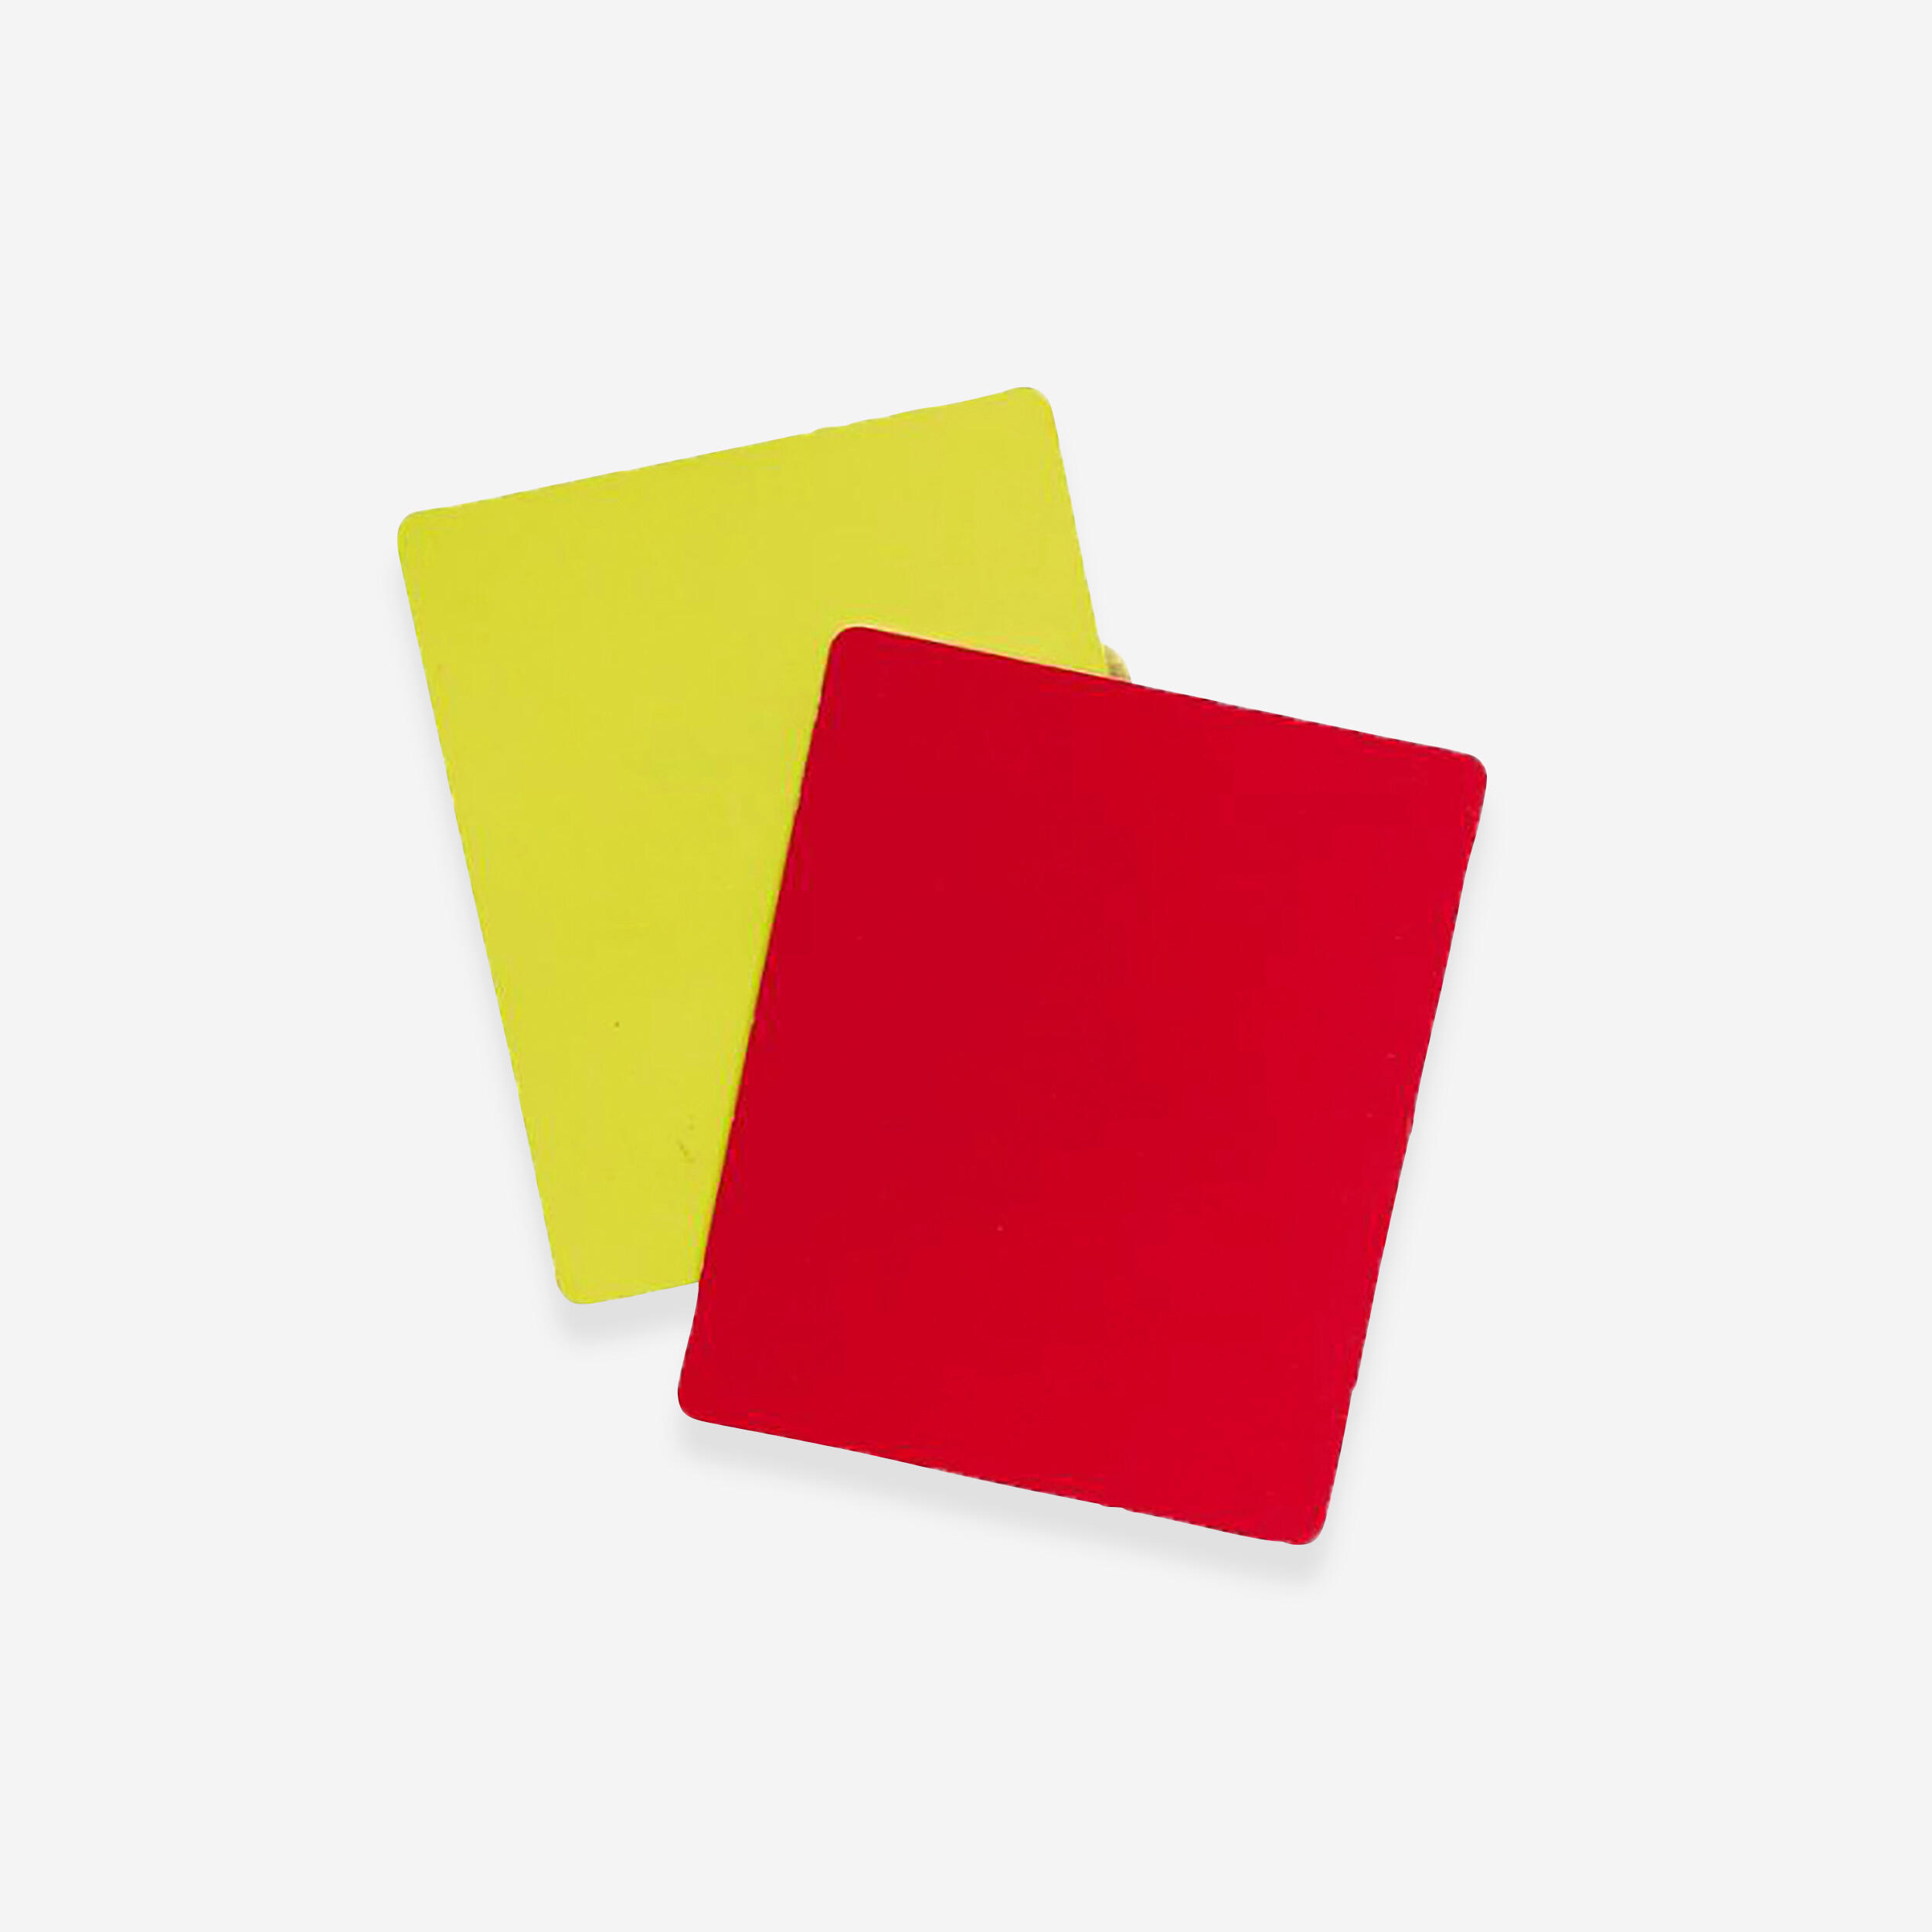 KIPSTA Set of Football Referee Cards - Yellow Red